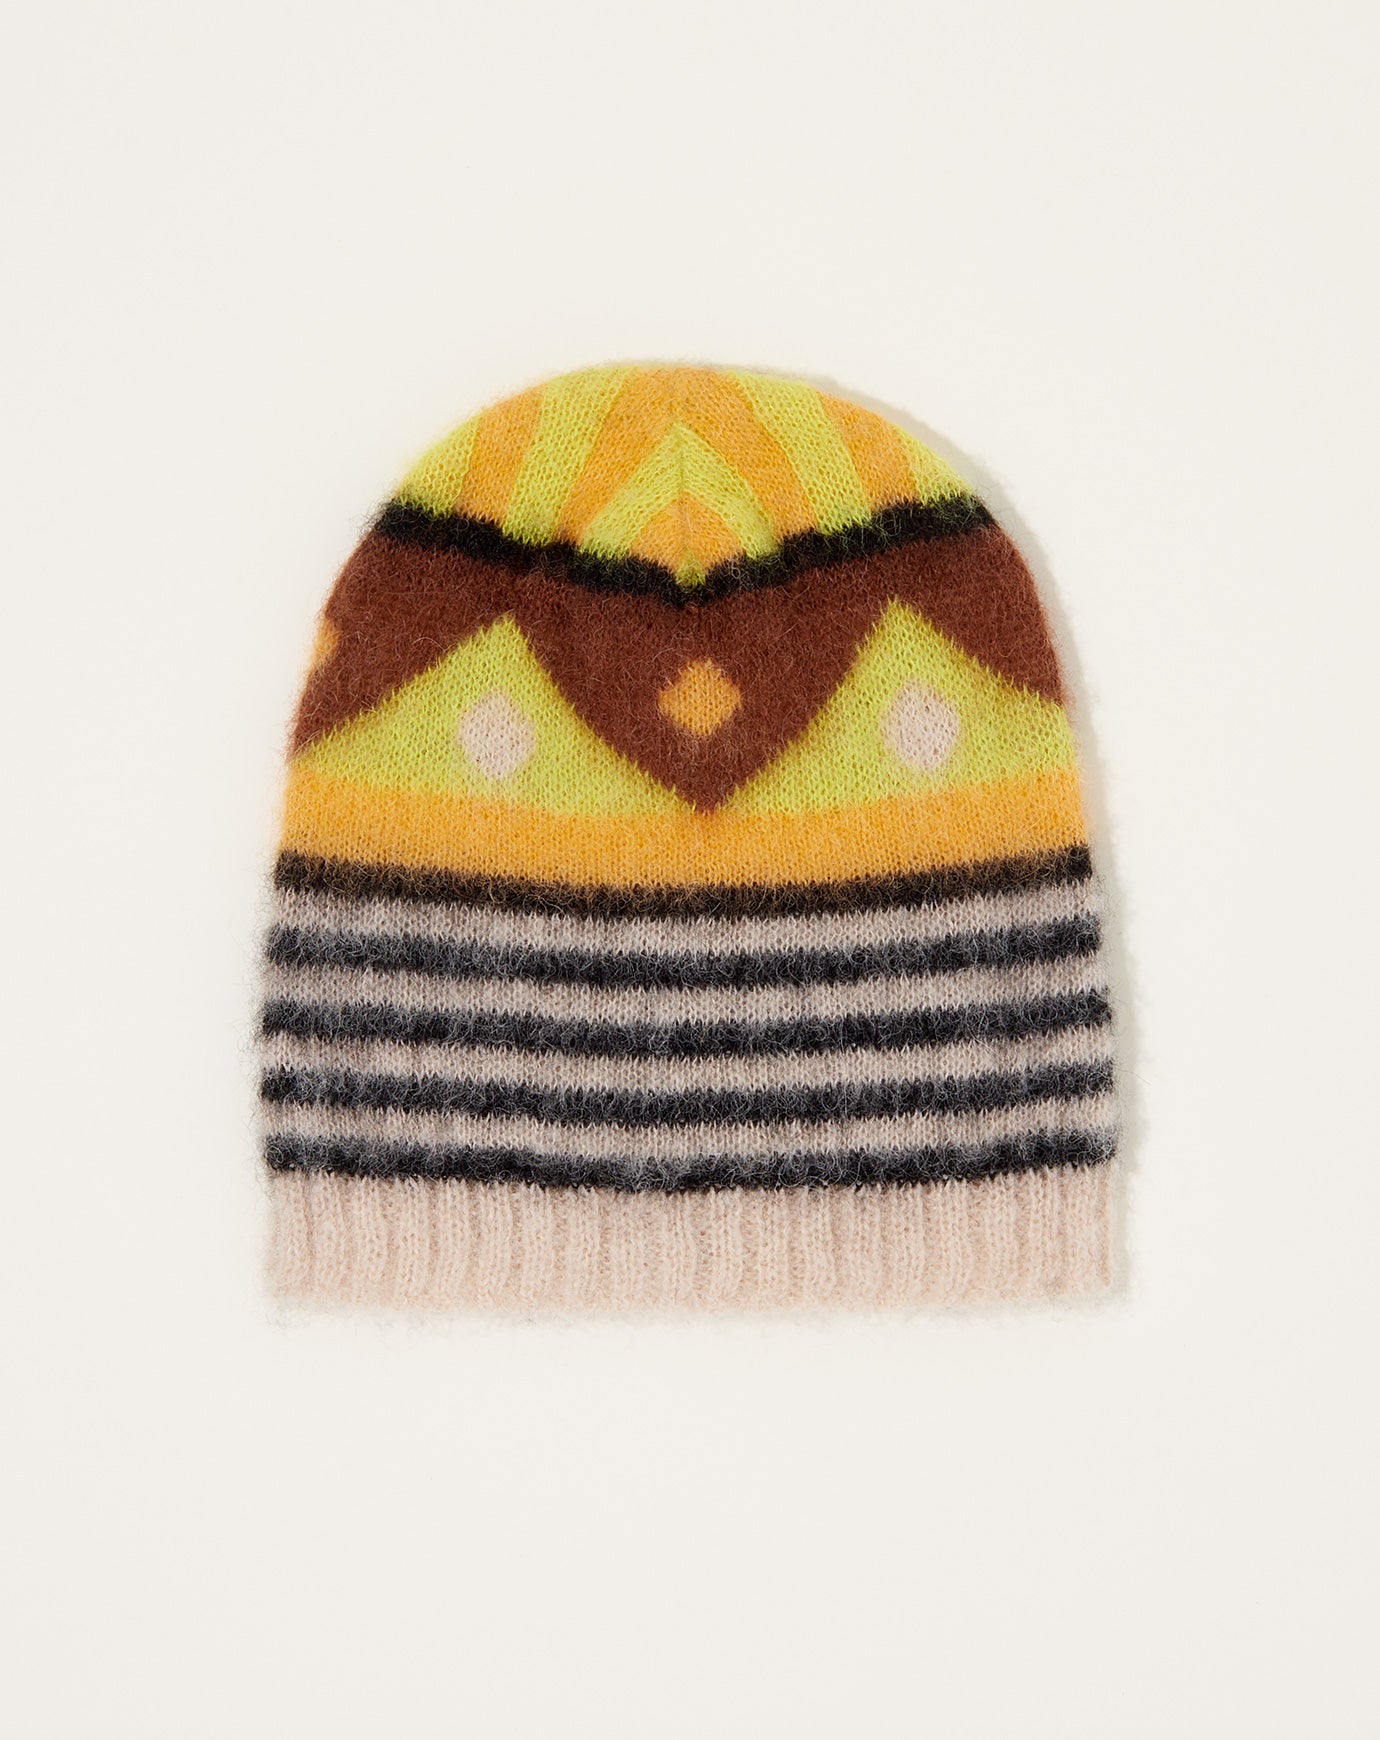 Exquisite J Mohair 'Etno' Brushed Beanie